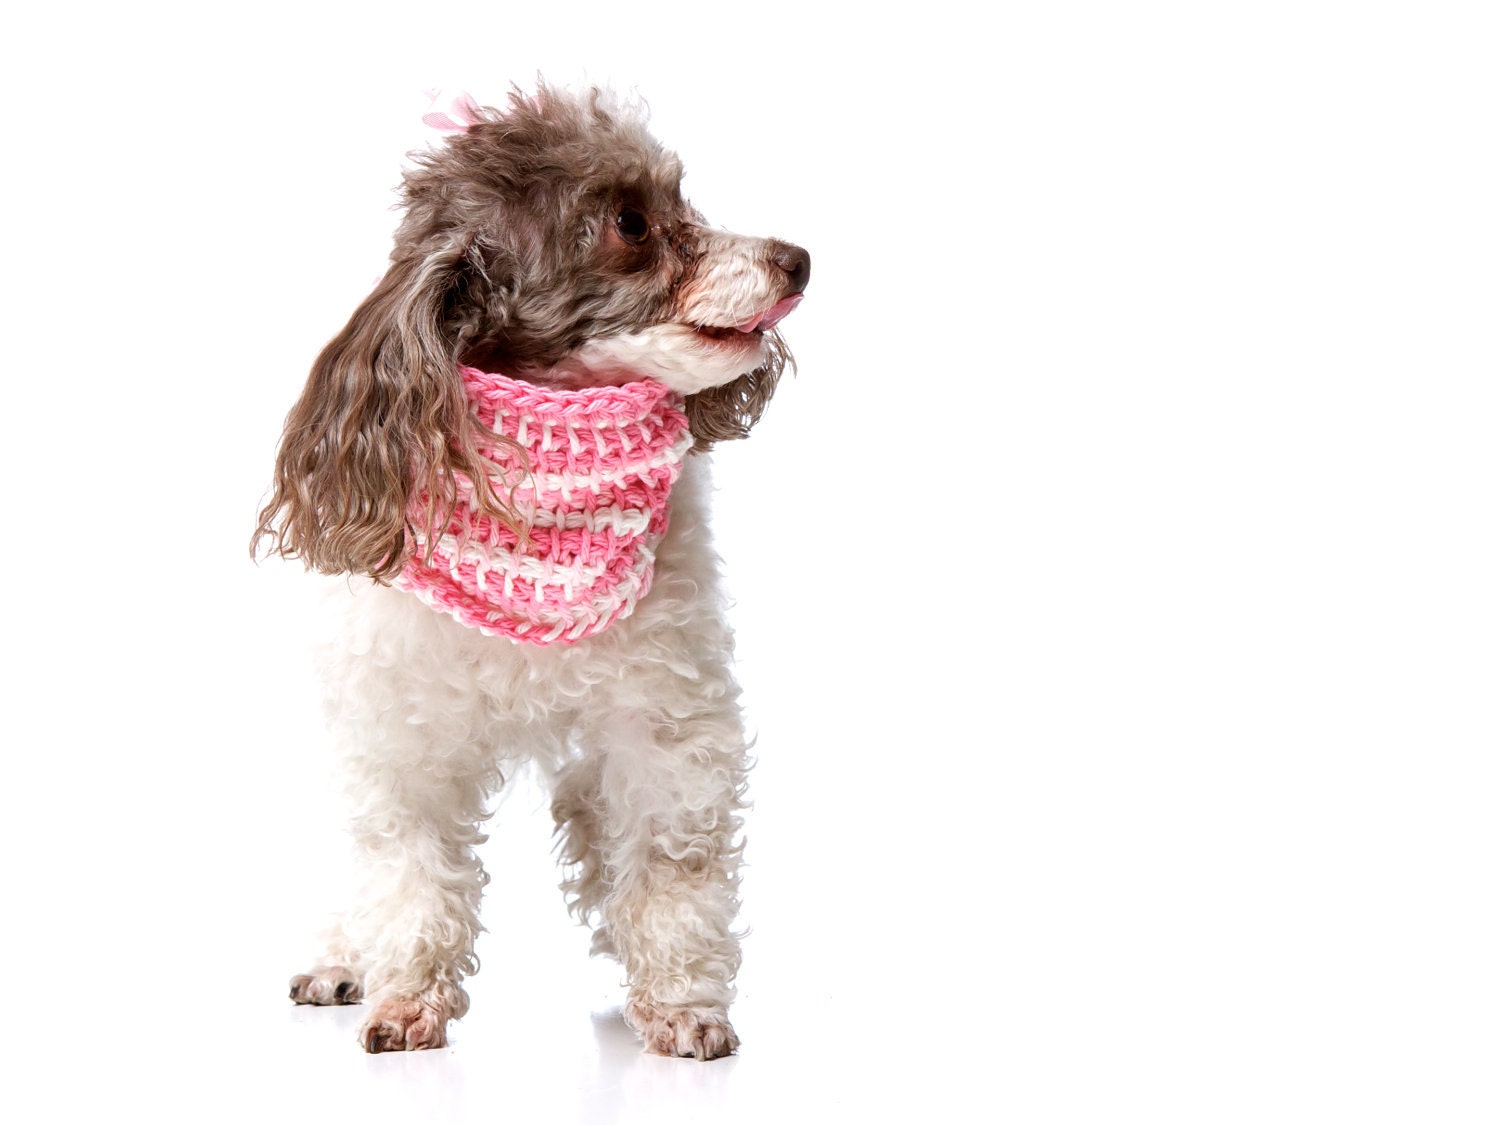 XS Pretty in Pink Spring Dog Sweater Cowl (neck warmer / scarf for dogs) Hot Pink and White 100% Cotton- Tunisian Crochet